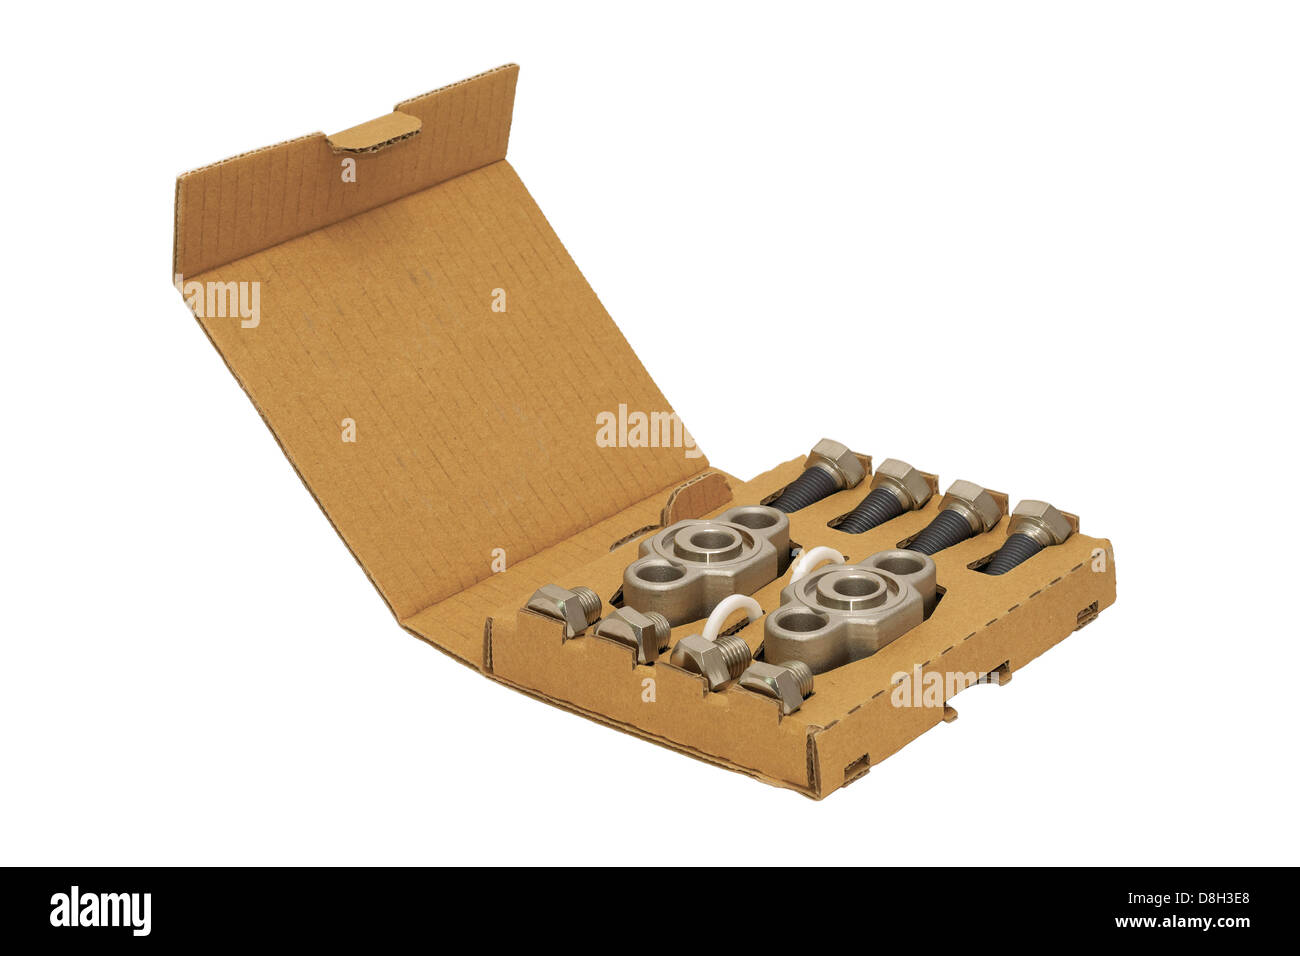 cardboard, box, packaging, white, isolated, object, product, container, opened, carton, element, bolt, screw, metal, fasteners, Stock Photo